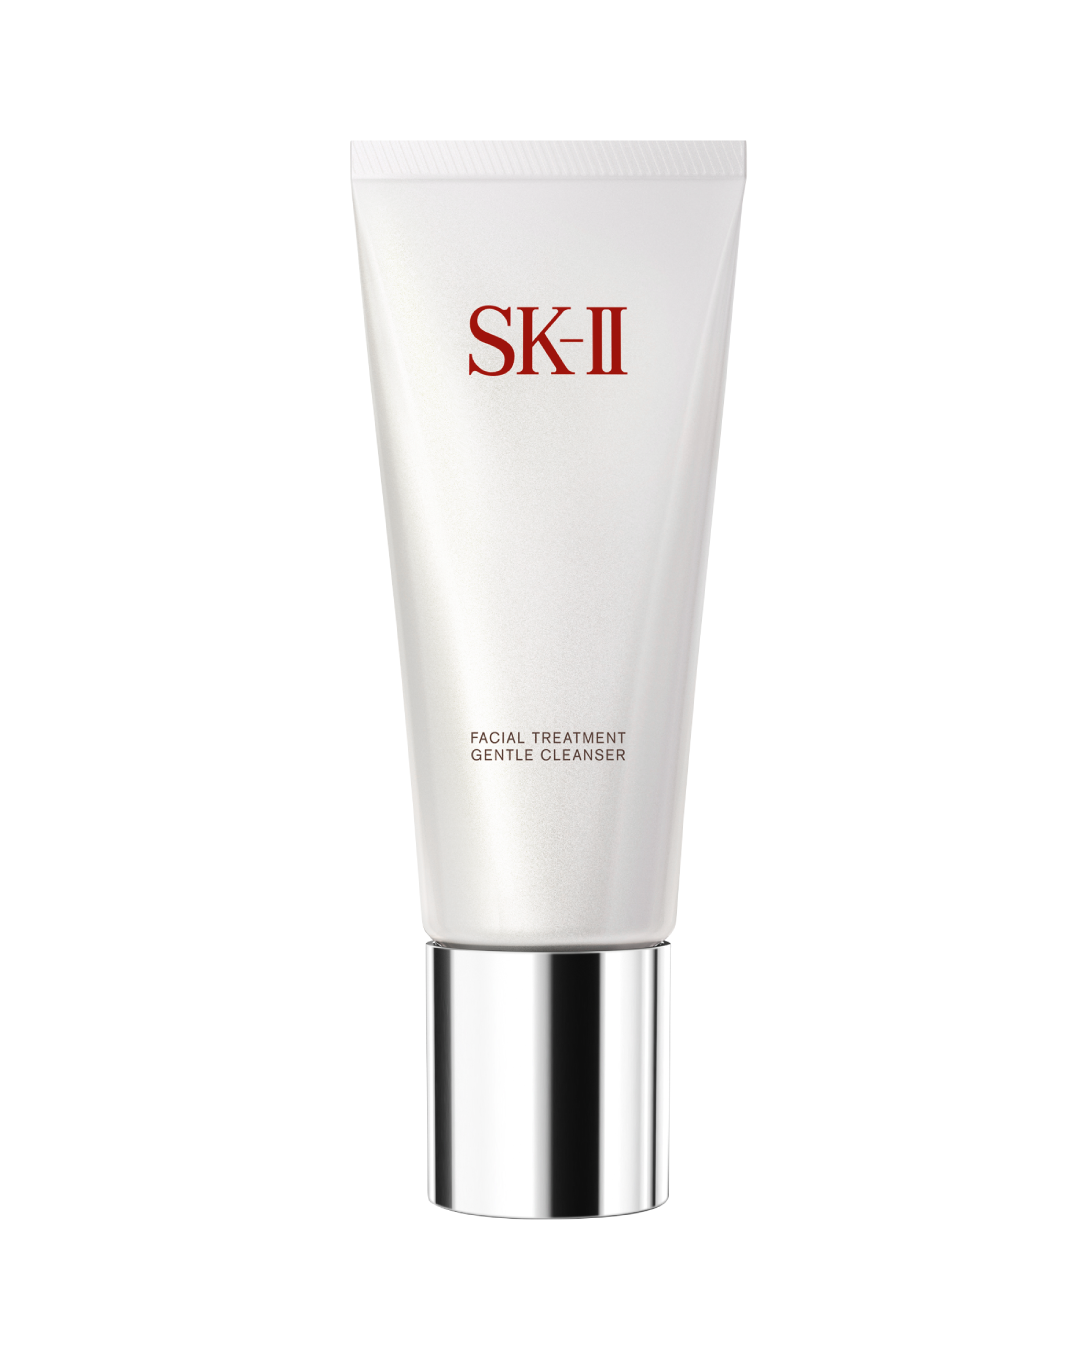 SK-II Facial Treatment Gentle Cleanser (120g) - Best Buy World Philippines